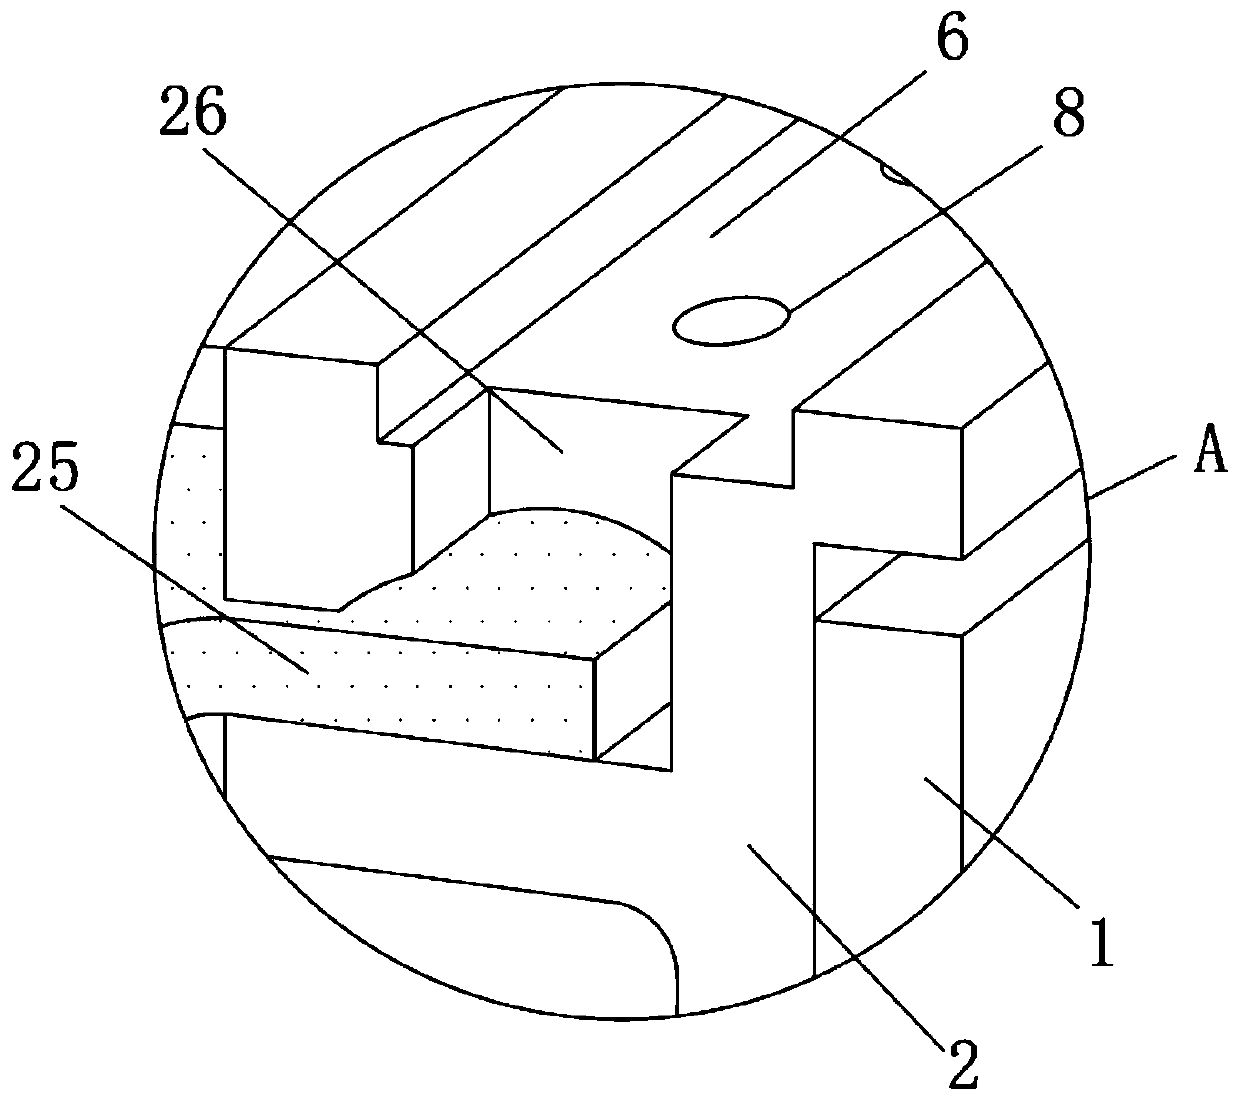 Height-adjustable bridge expansion joint component capable of realizing transverse connection